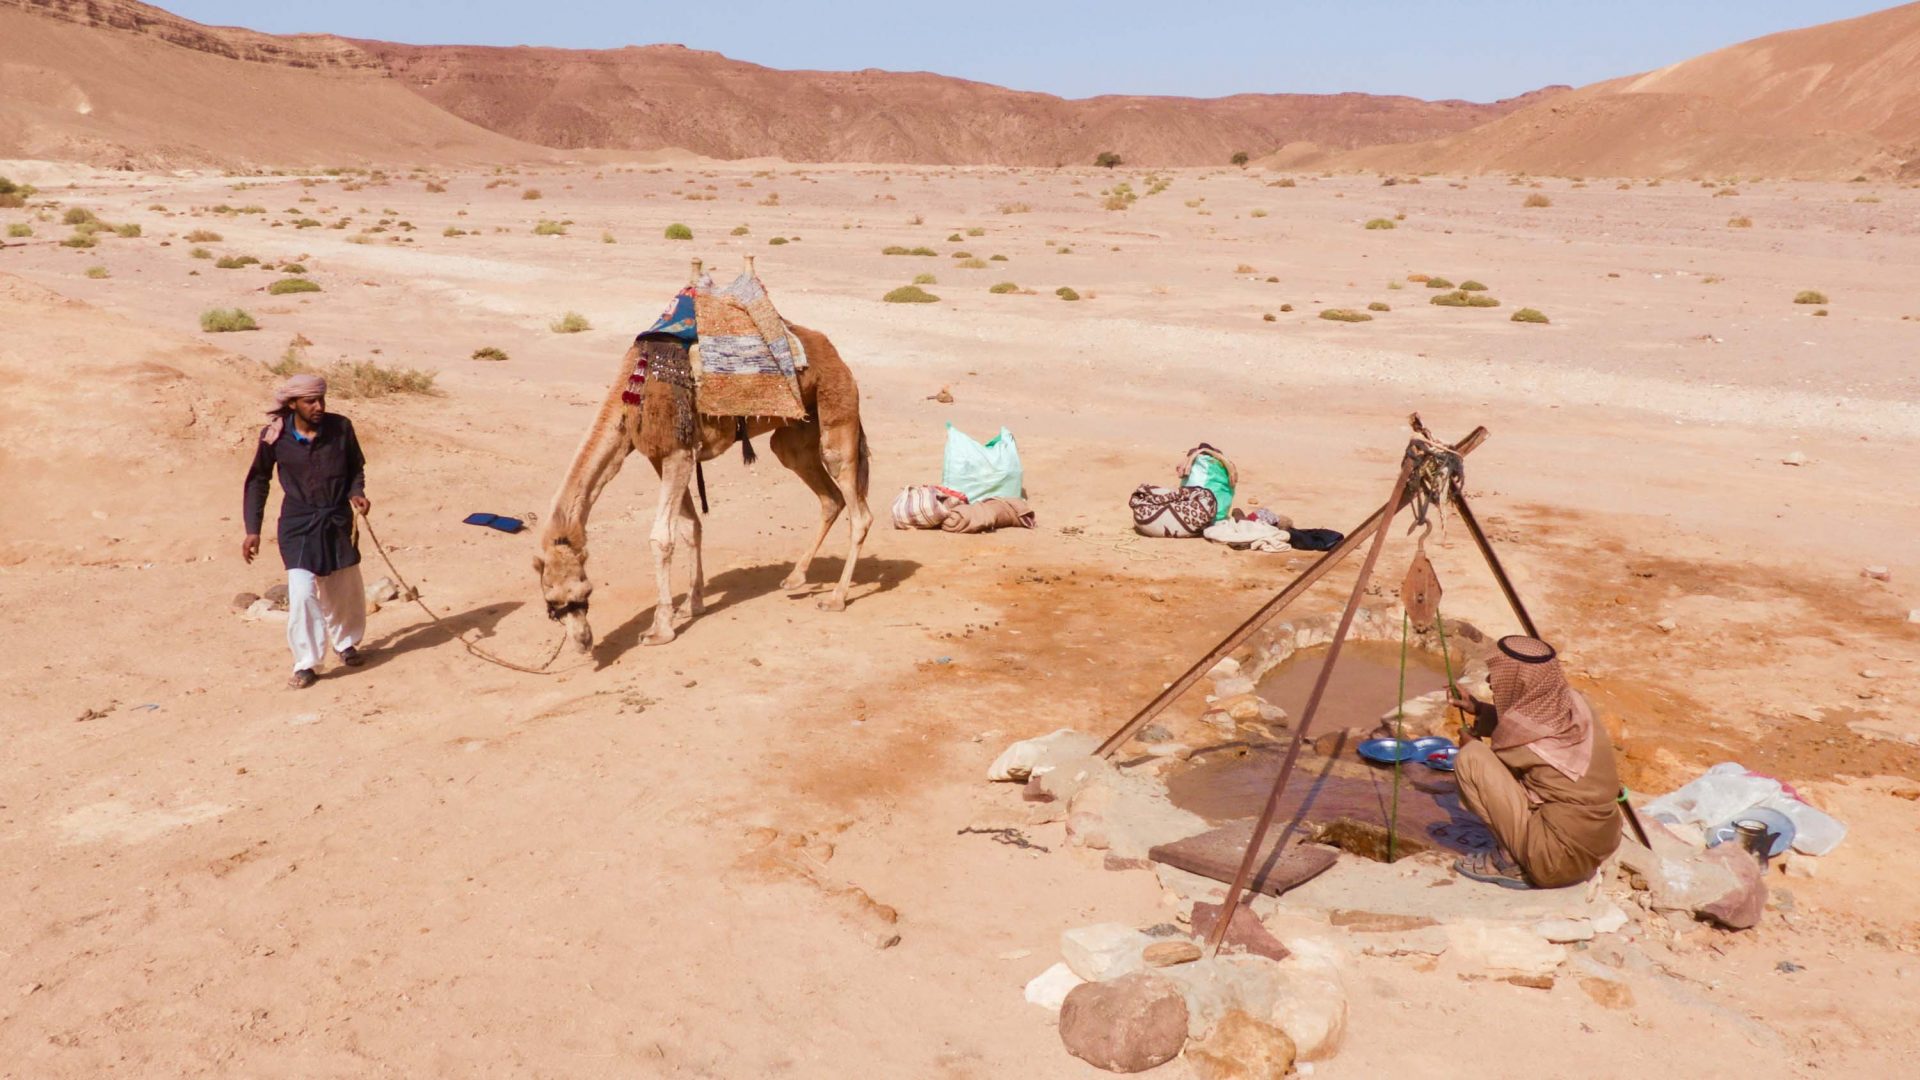 Harboush the camel re-hydrates at a well in the Sinai desert.